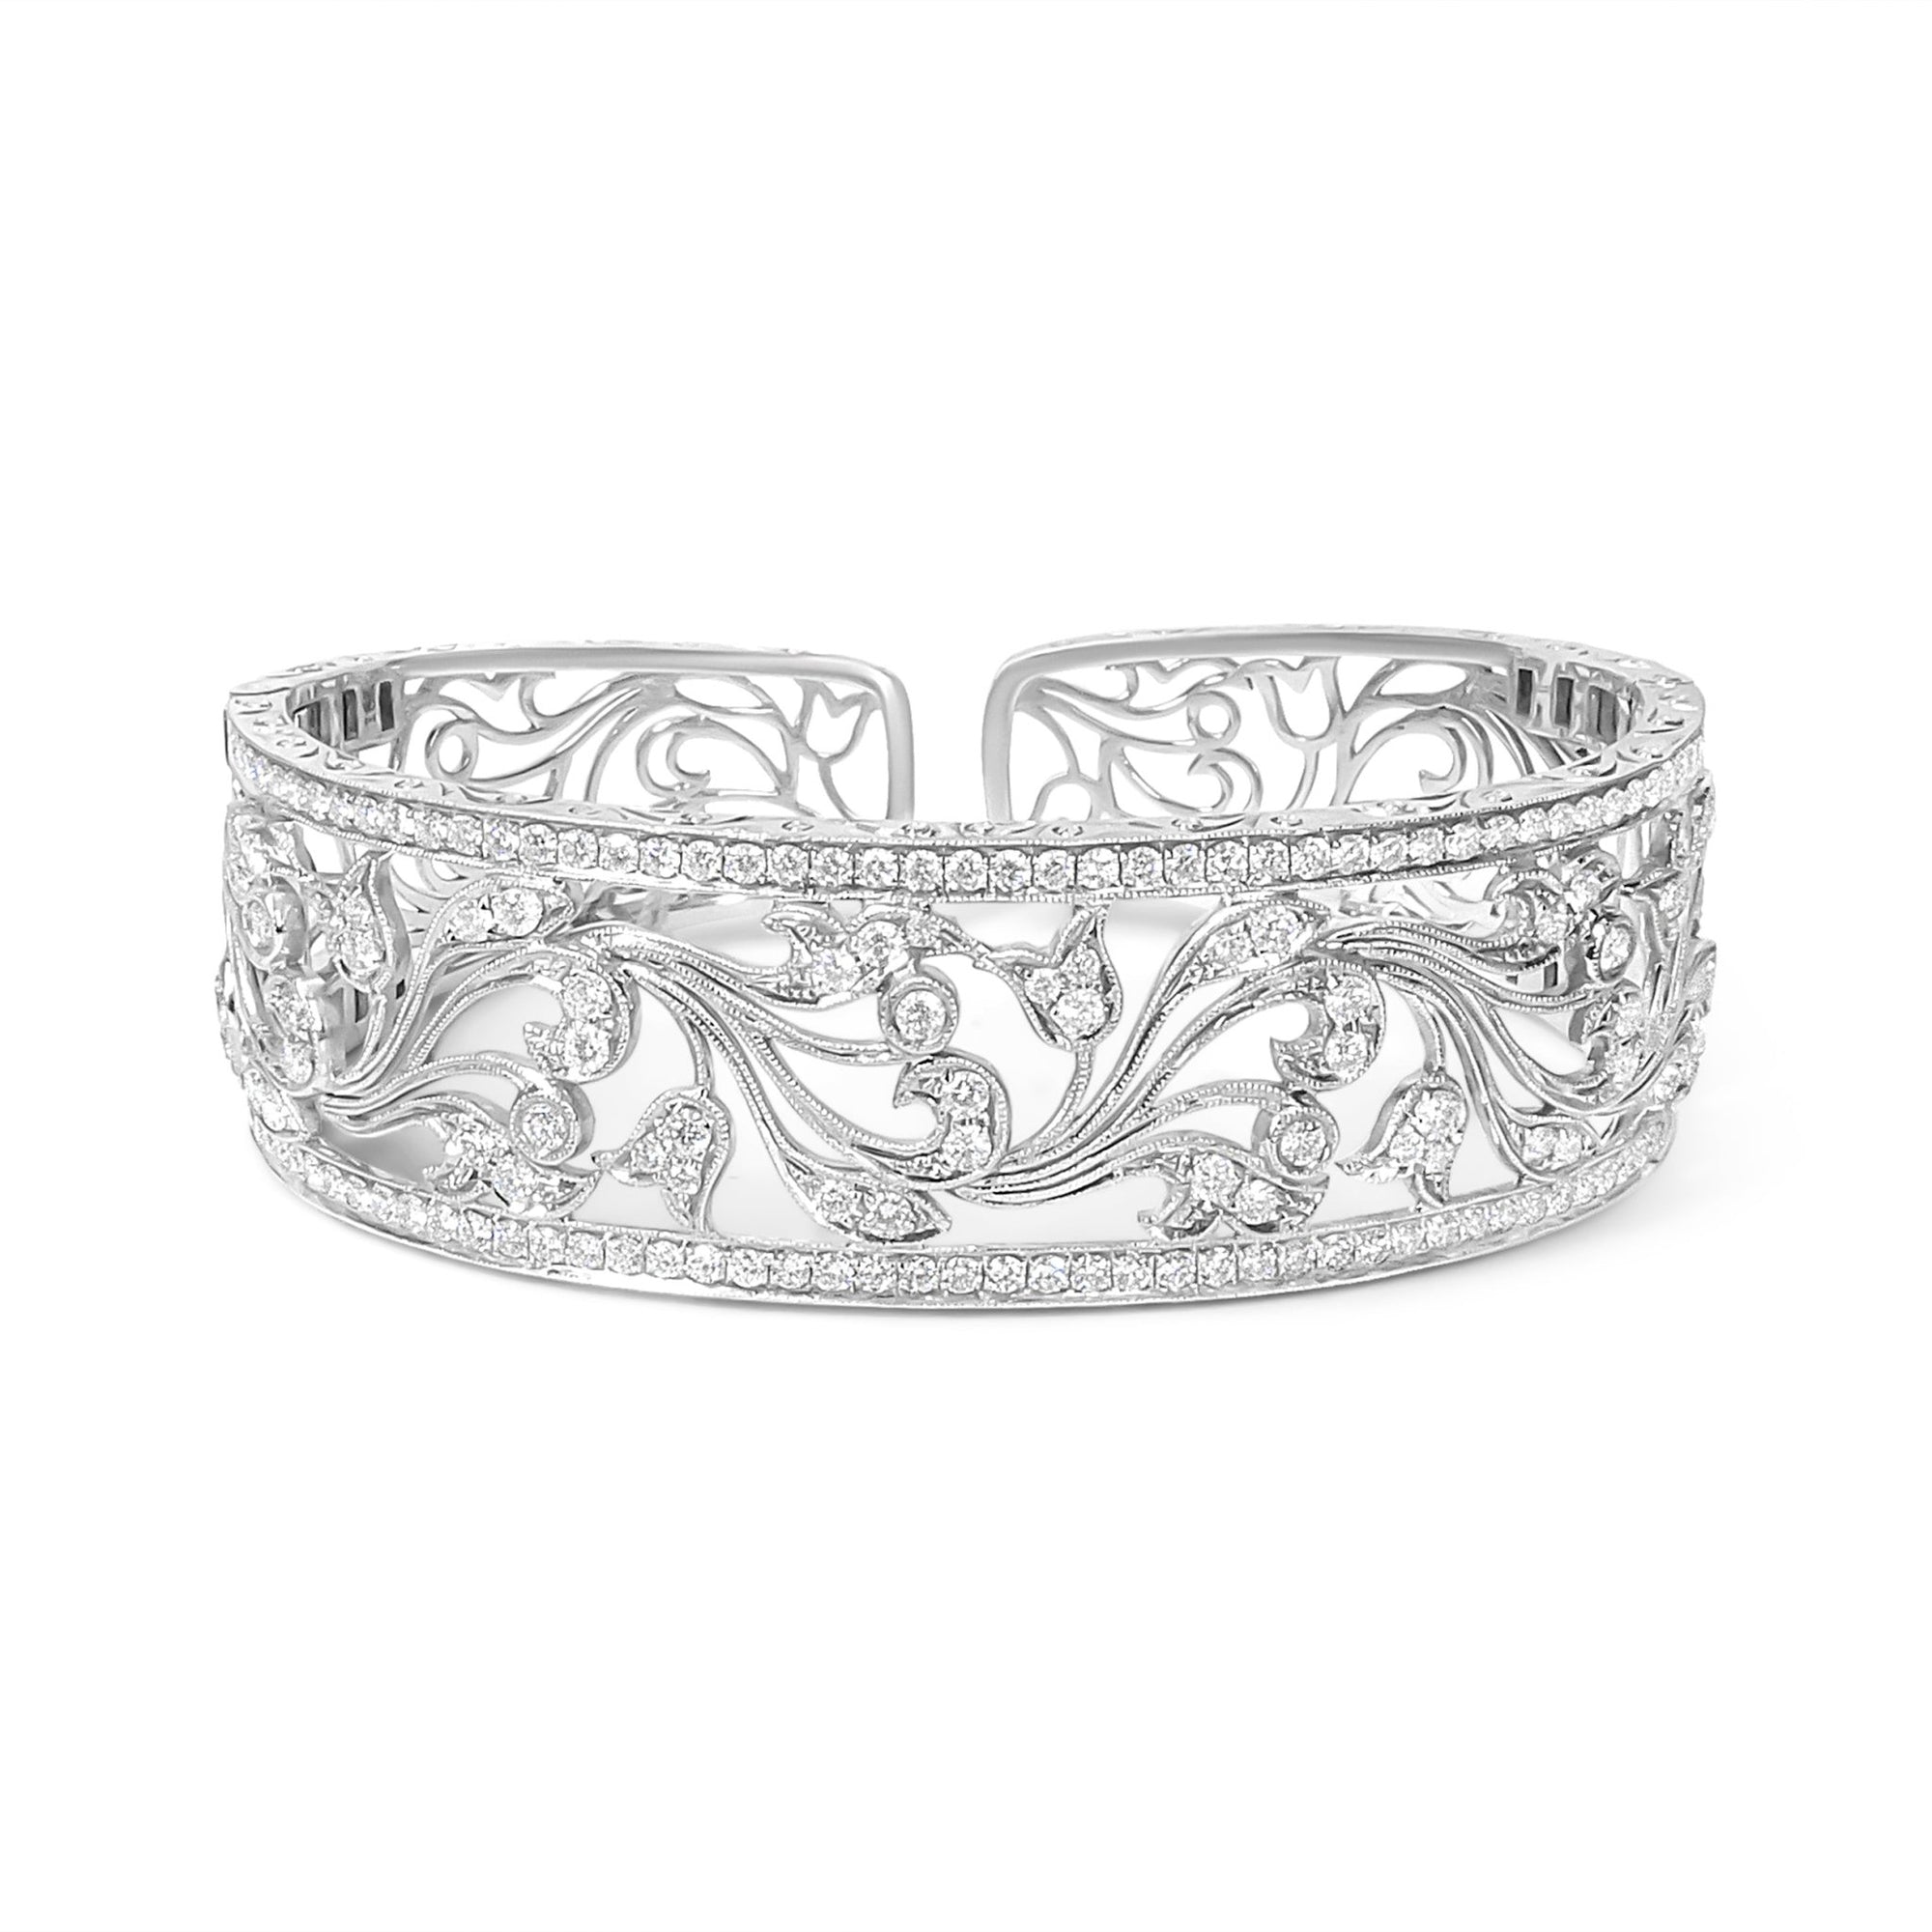 18K White Gold 3 1/4 Cttw Pave Diamond Openwork Floral Filigree Swirl Bangle Cuff Bracelet (H-I Color, VS2-SI1 Clarity) - LinkagejewelrydesignLinkagejewelrydesign